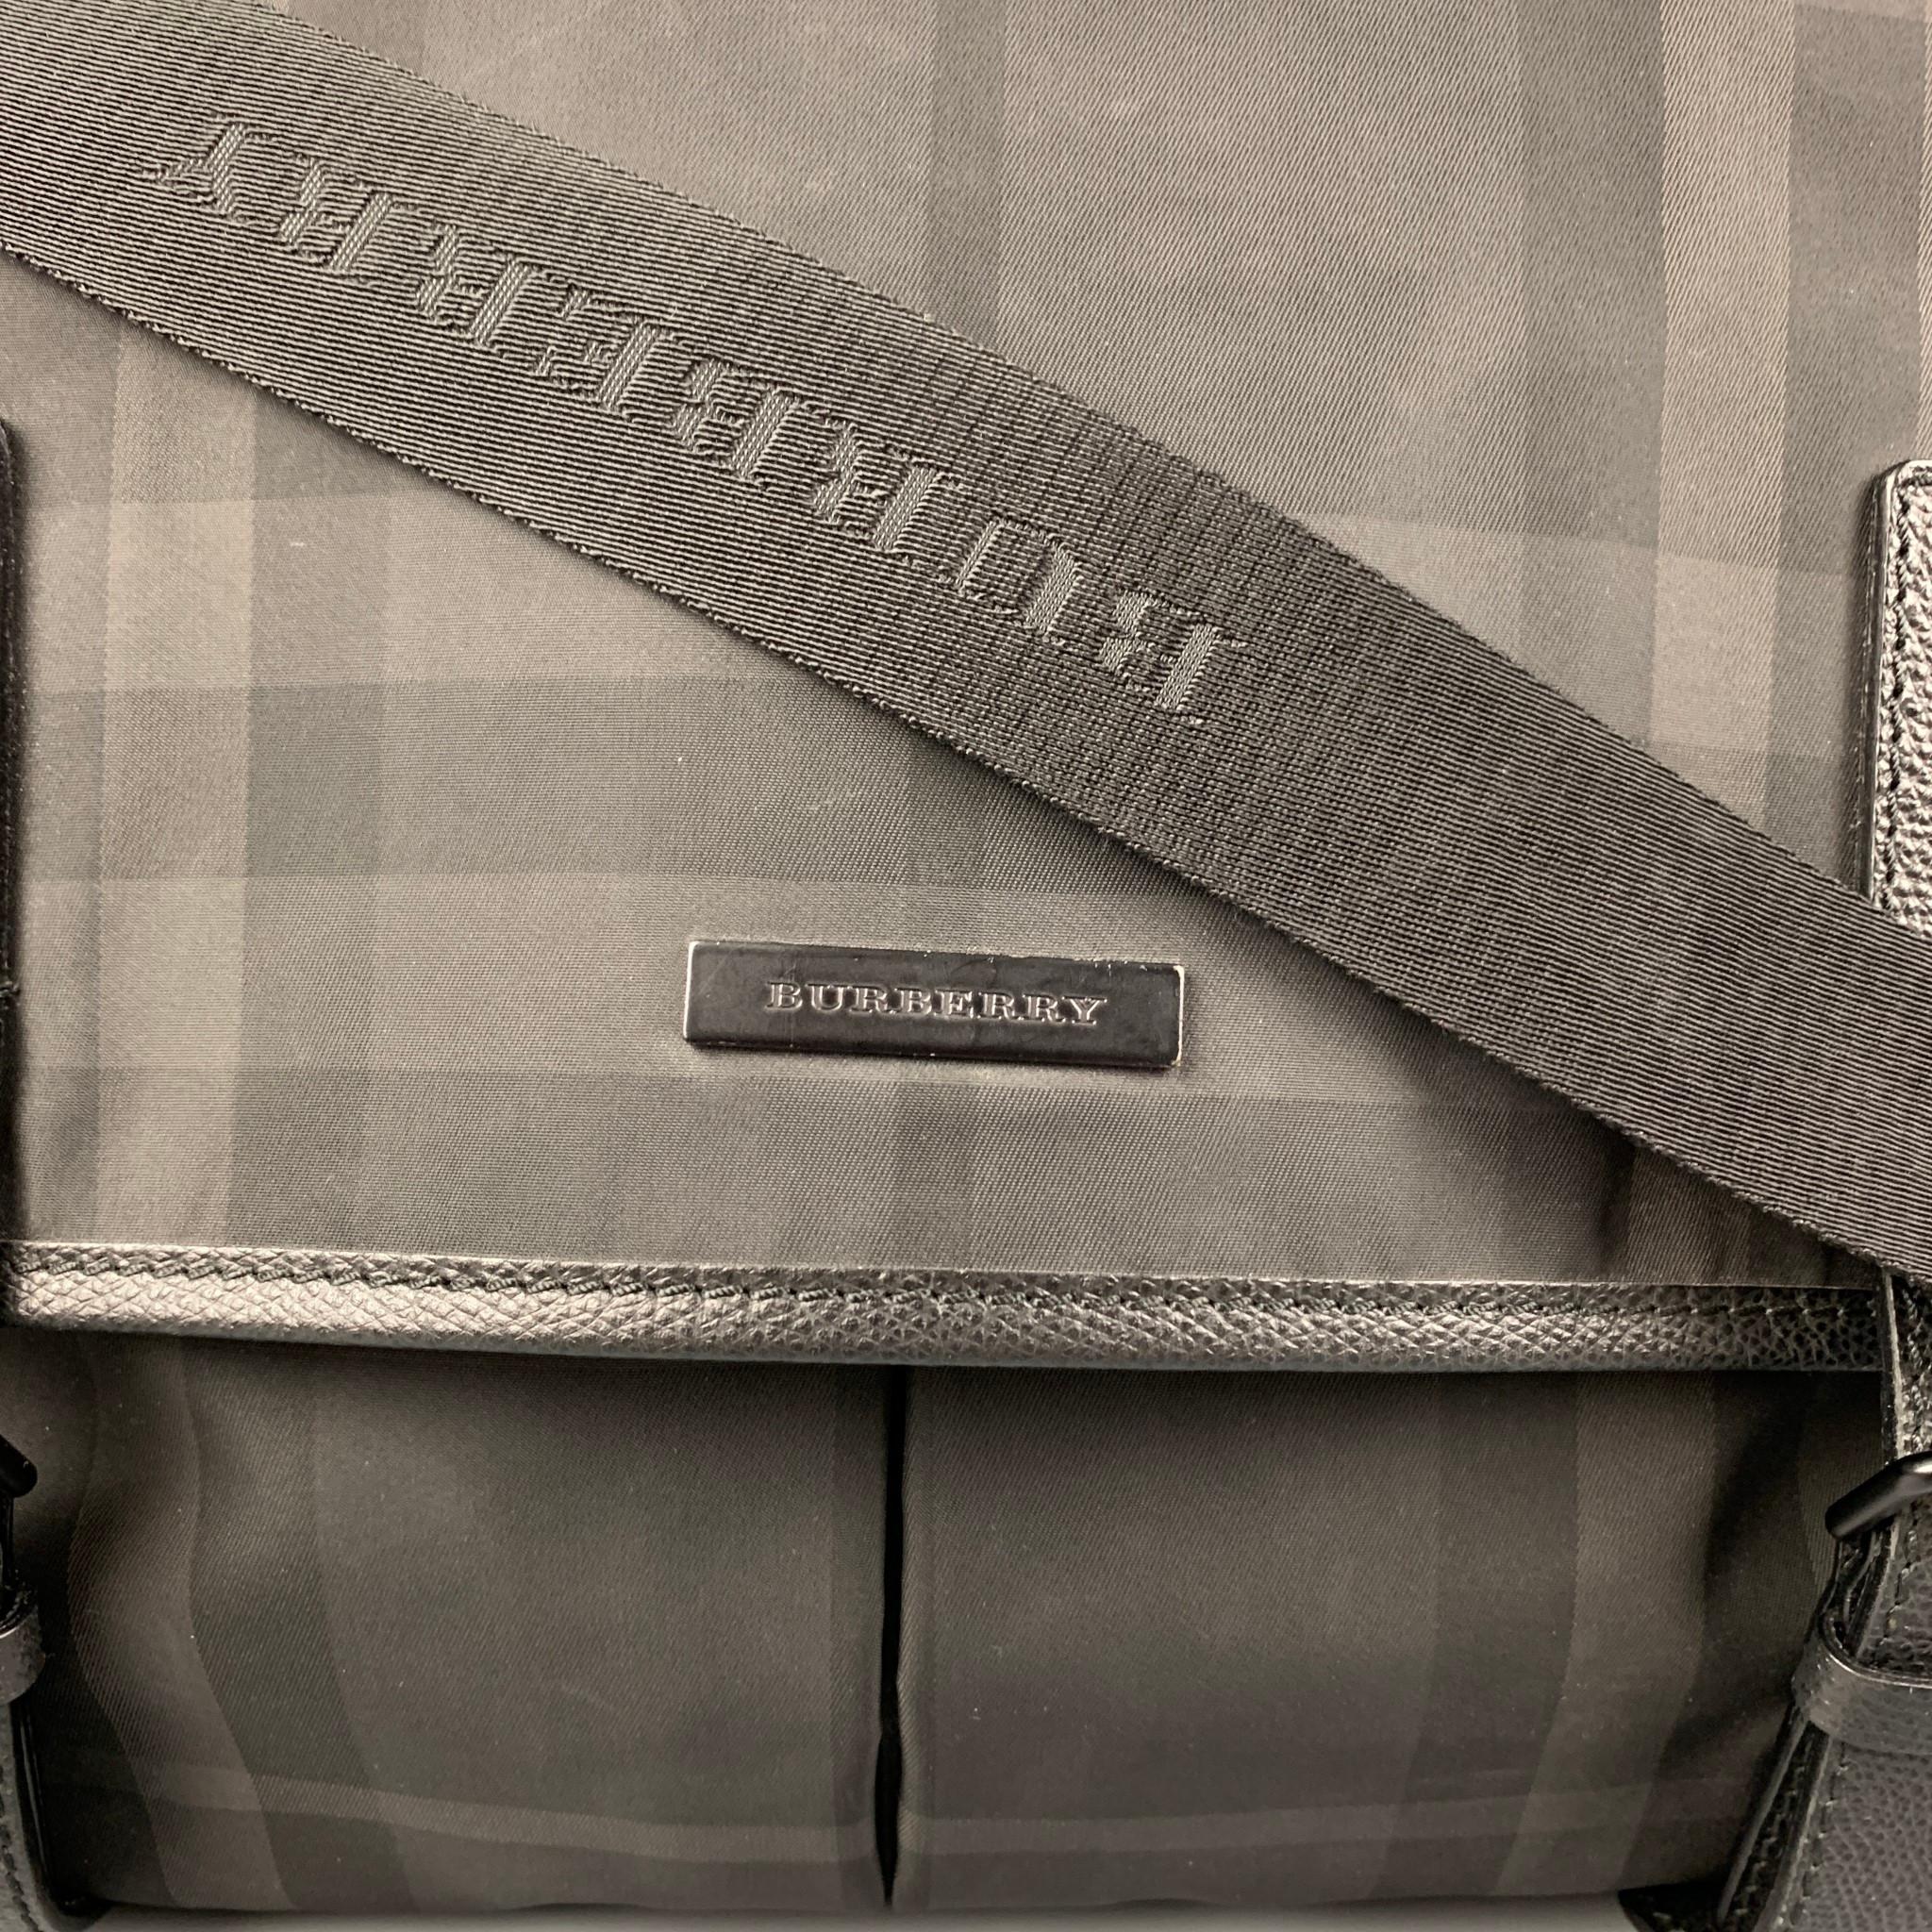 BURBERRY bag comes in a black & grey plaid nylon featuring a messenger style, adjustable cross body strap, leather trim, back pocket, inner pockets, and a snap button closure. Made in Italy. 

Very Good Pre-Owned Condition.
Marked: